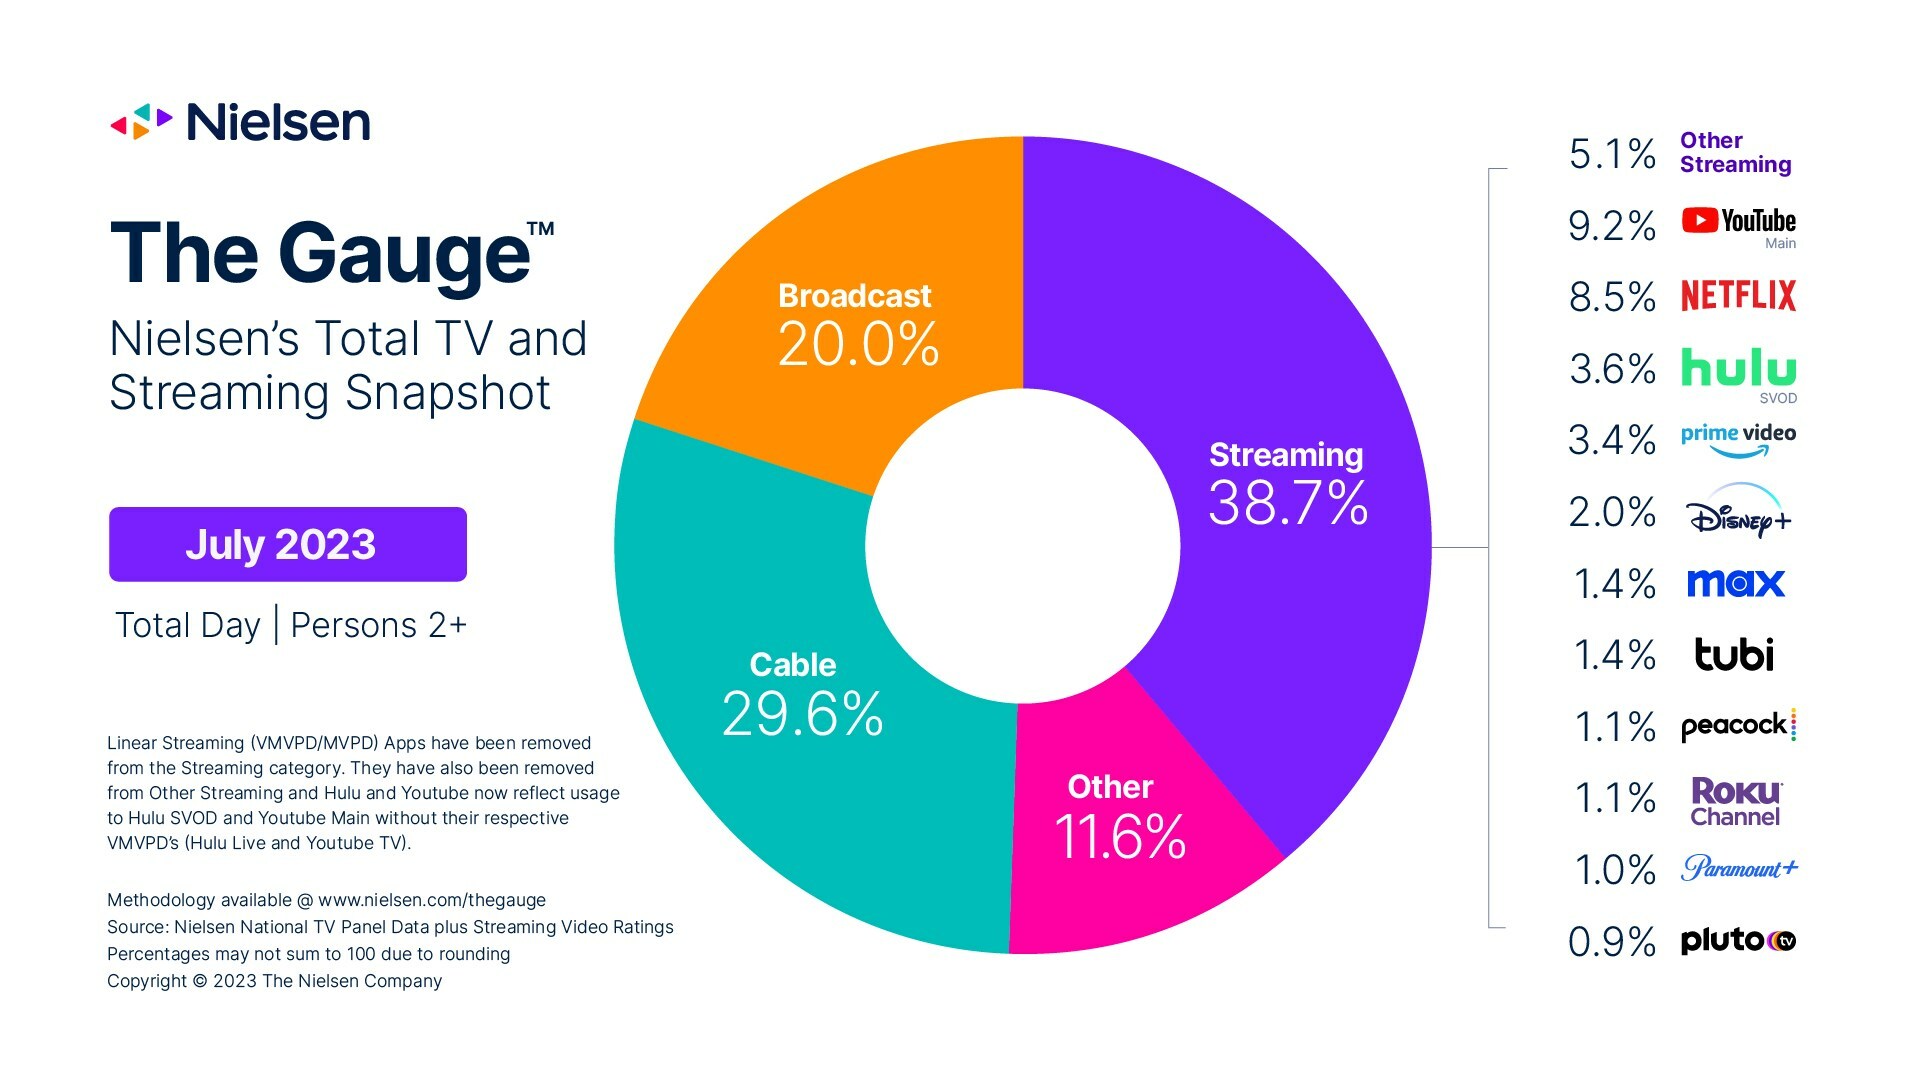 Nielsen The Gauge - Broadcast, Cable TV, Streaming (YouTube, Netflix, Hulu, Prime Video, Disney+, MAX, tubi, Peacock, Paramount+, Roku Channel, Pluto TV, Other streaming), Other - July 2023